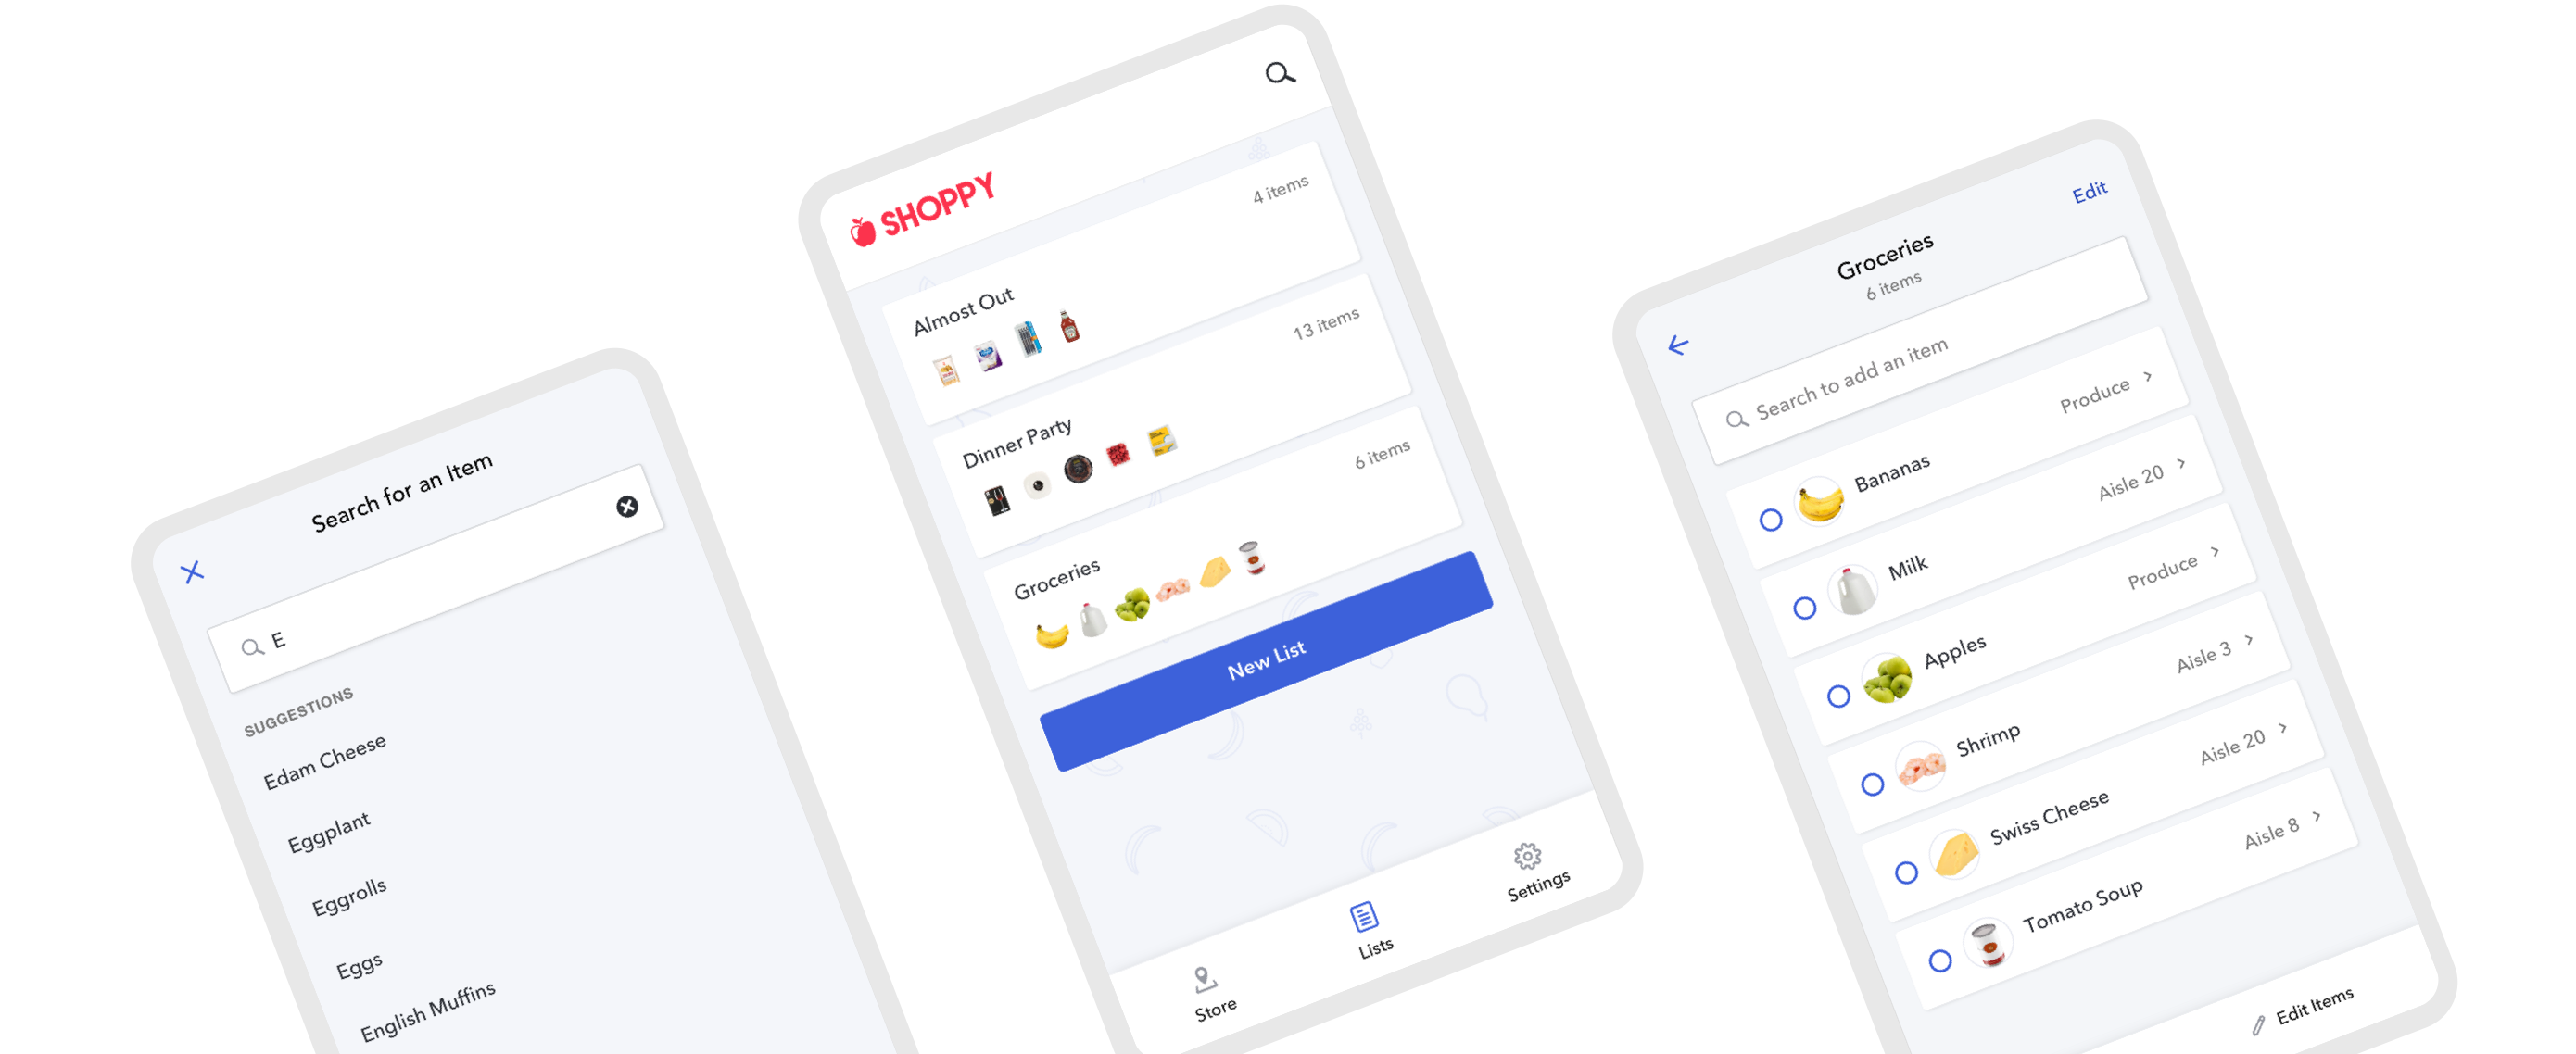 Shopping app mockup of home, list, and product search